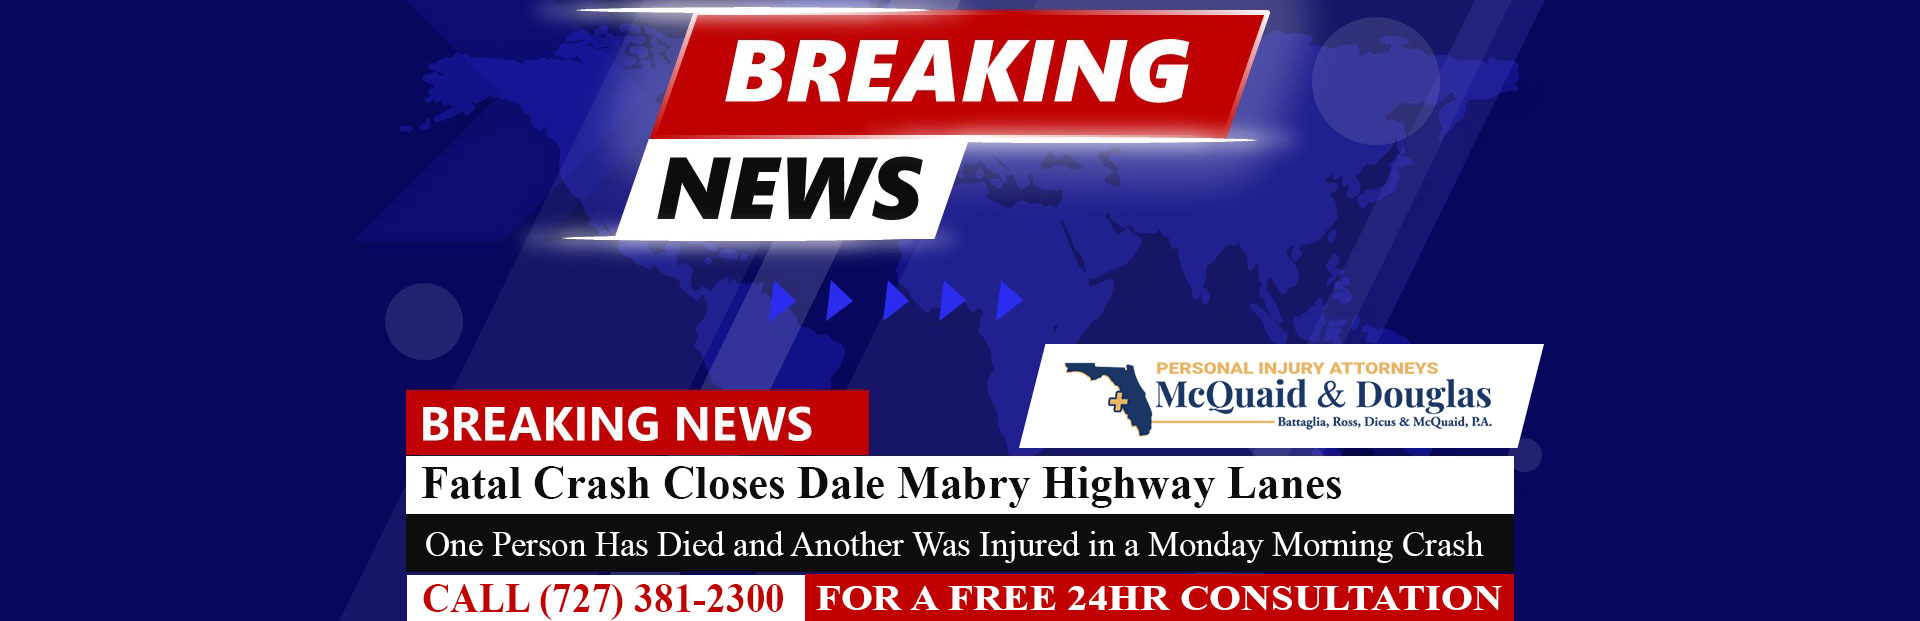 [06-03-24] Fatal Crash Closes Dale Mabry Highway Lanes in Tampa